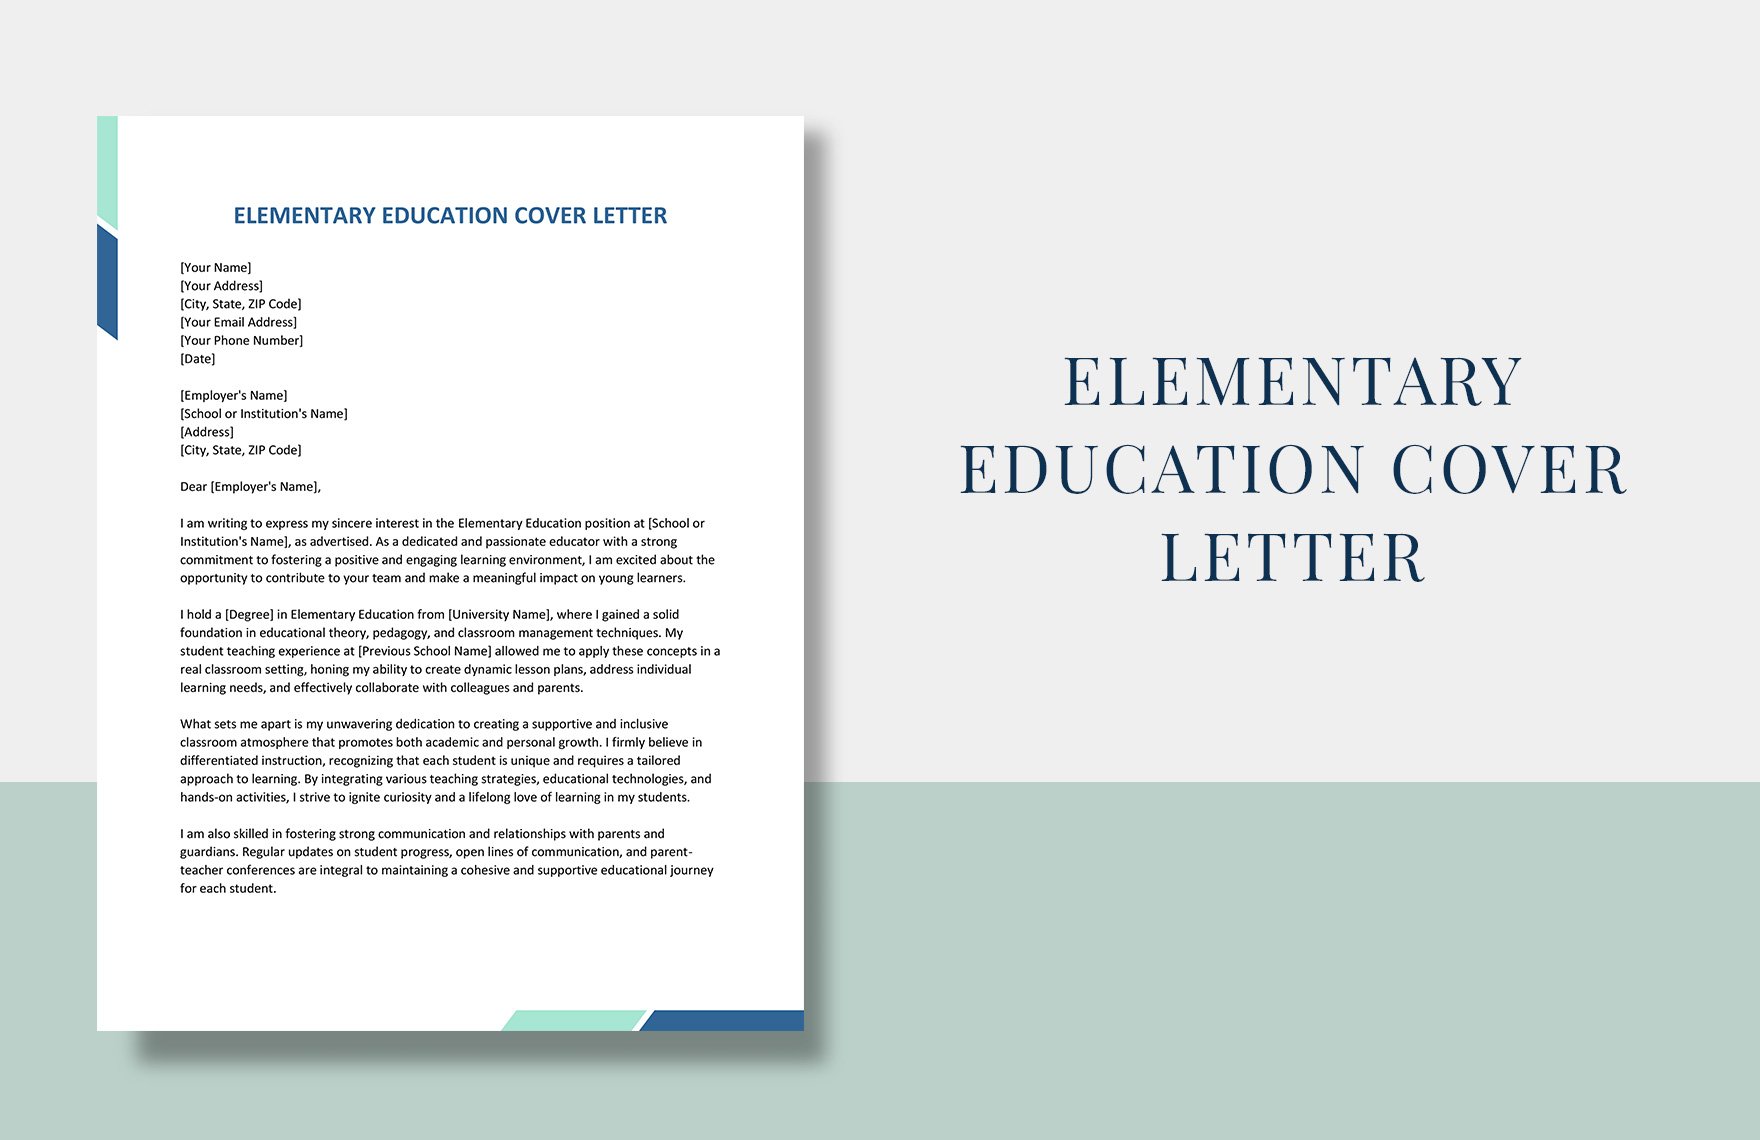 Elementary Education Cover Letter in Word, Google Docs, Apple Pages